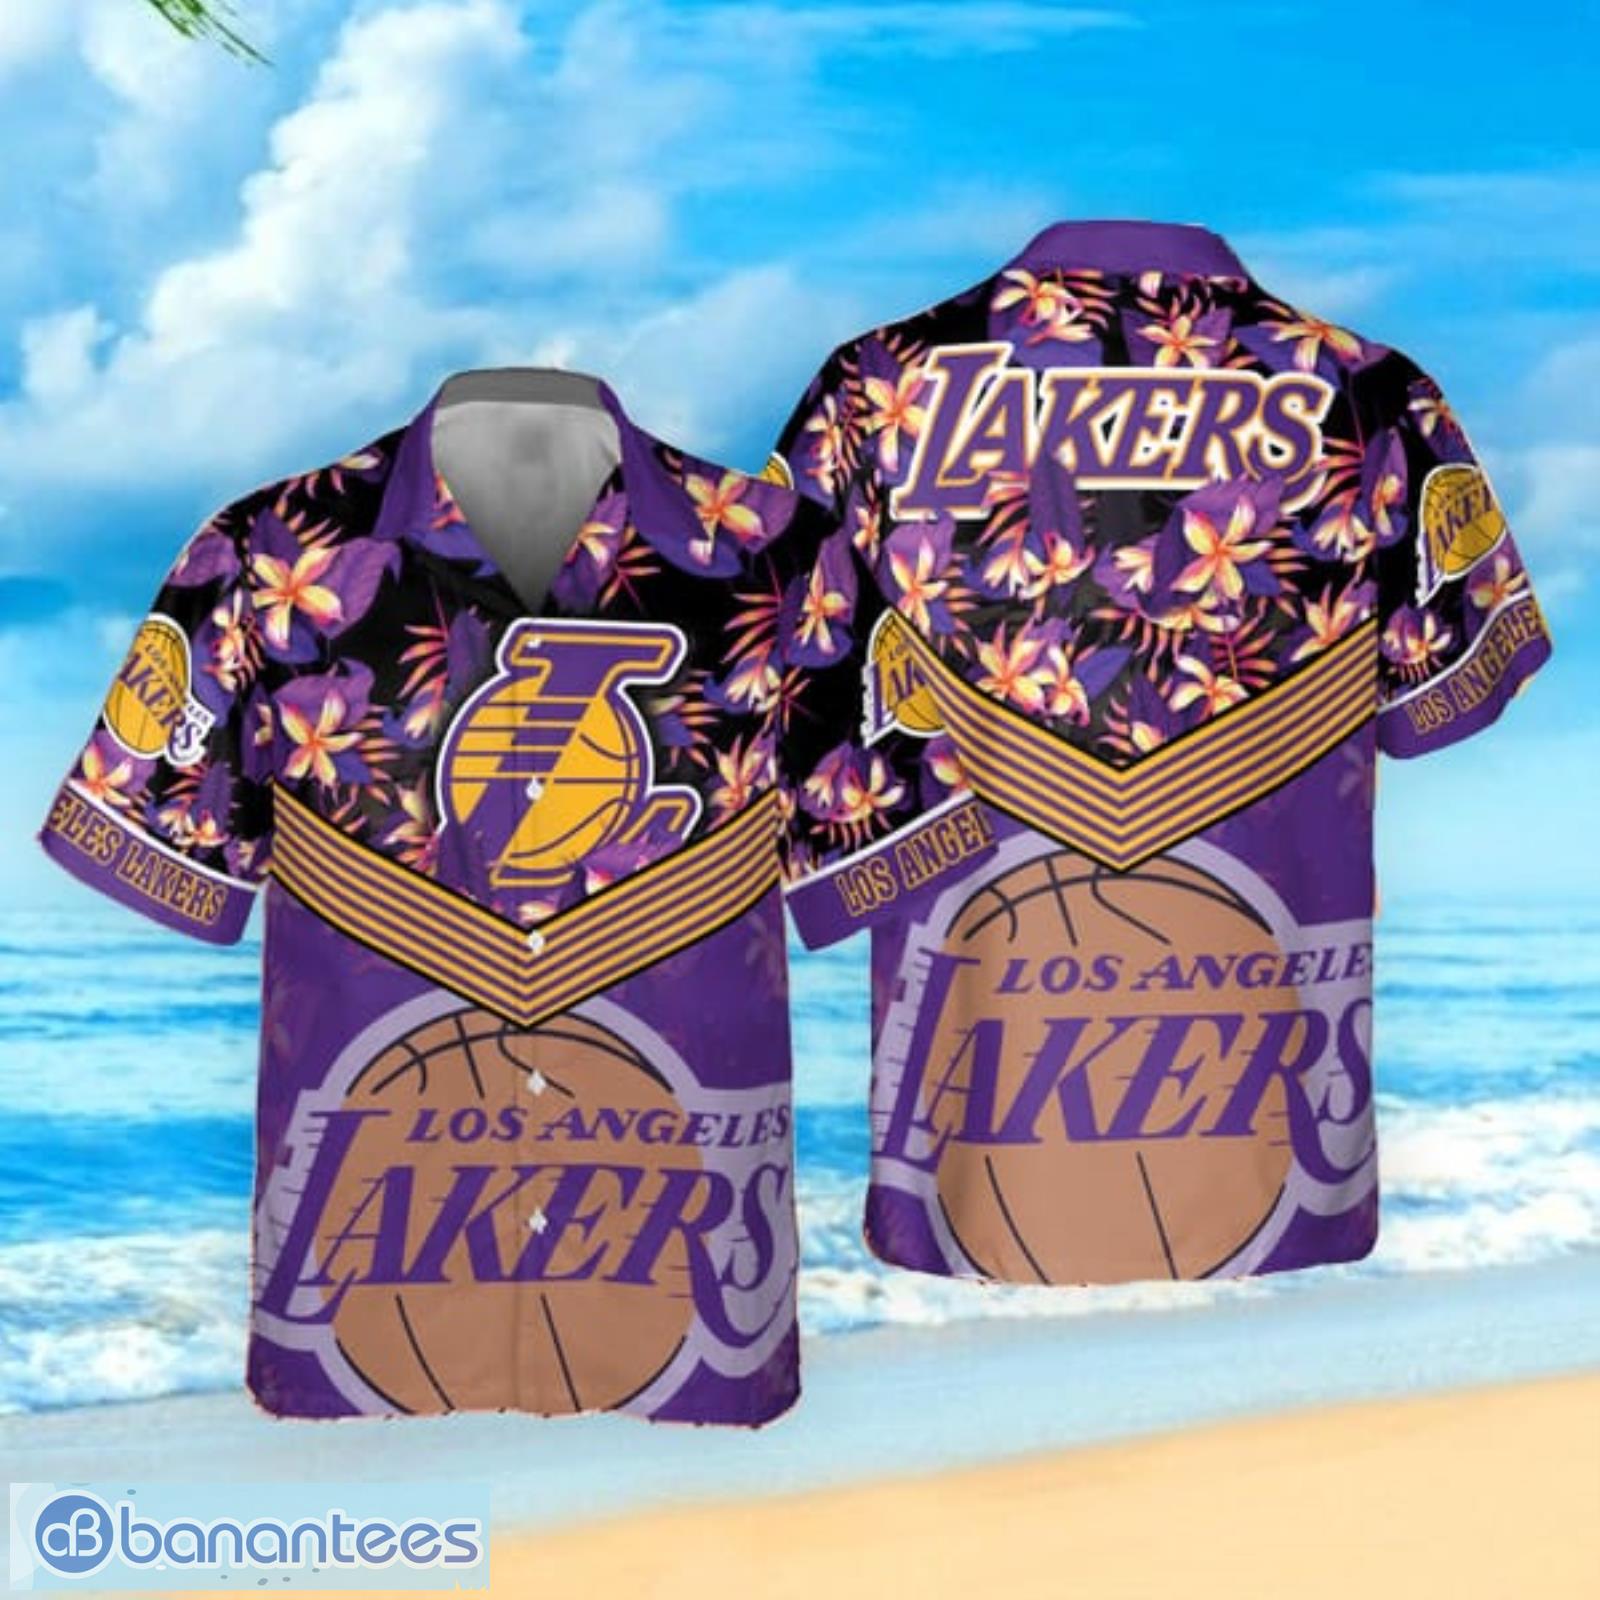 short sleeve lakers jersey